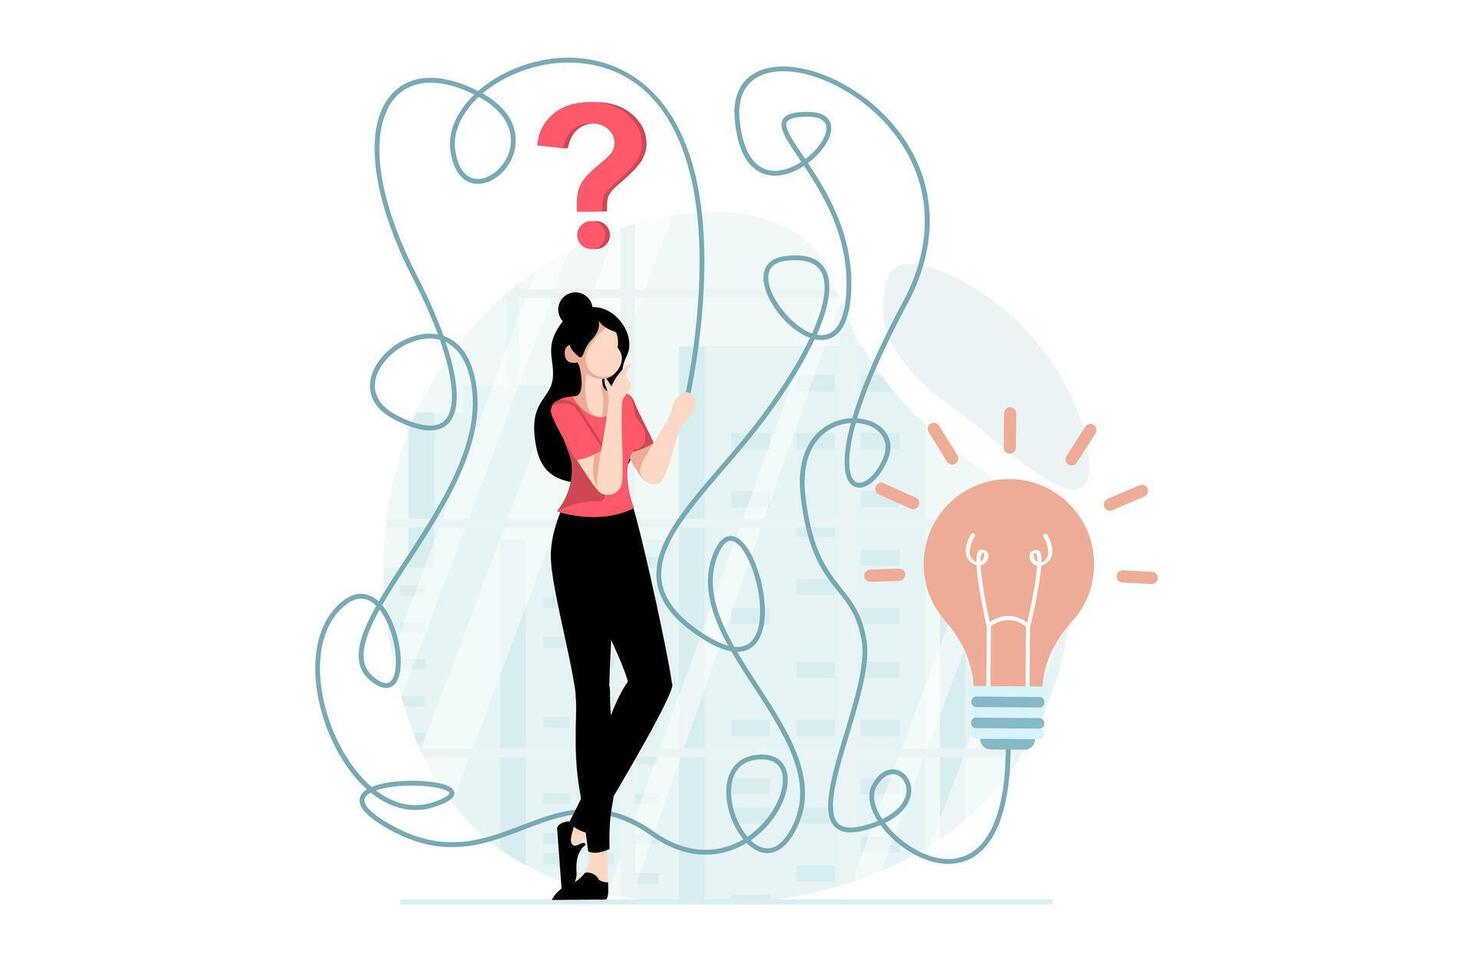 Finding solution concept with people scene in flat design. Woman thinks about questions and looks for right way to discover answers and new ideas. illustration with character situation for web vector